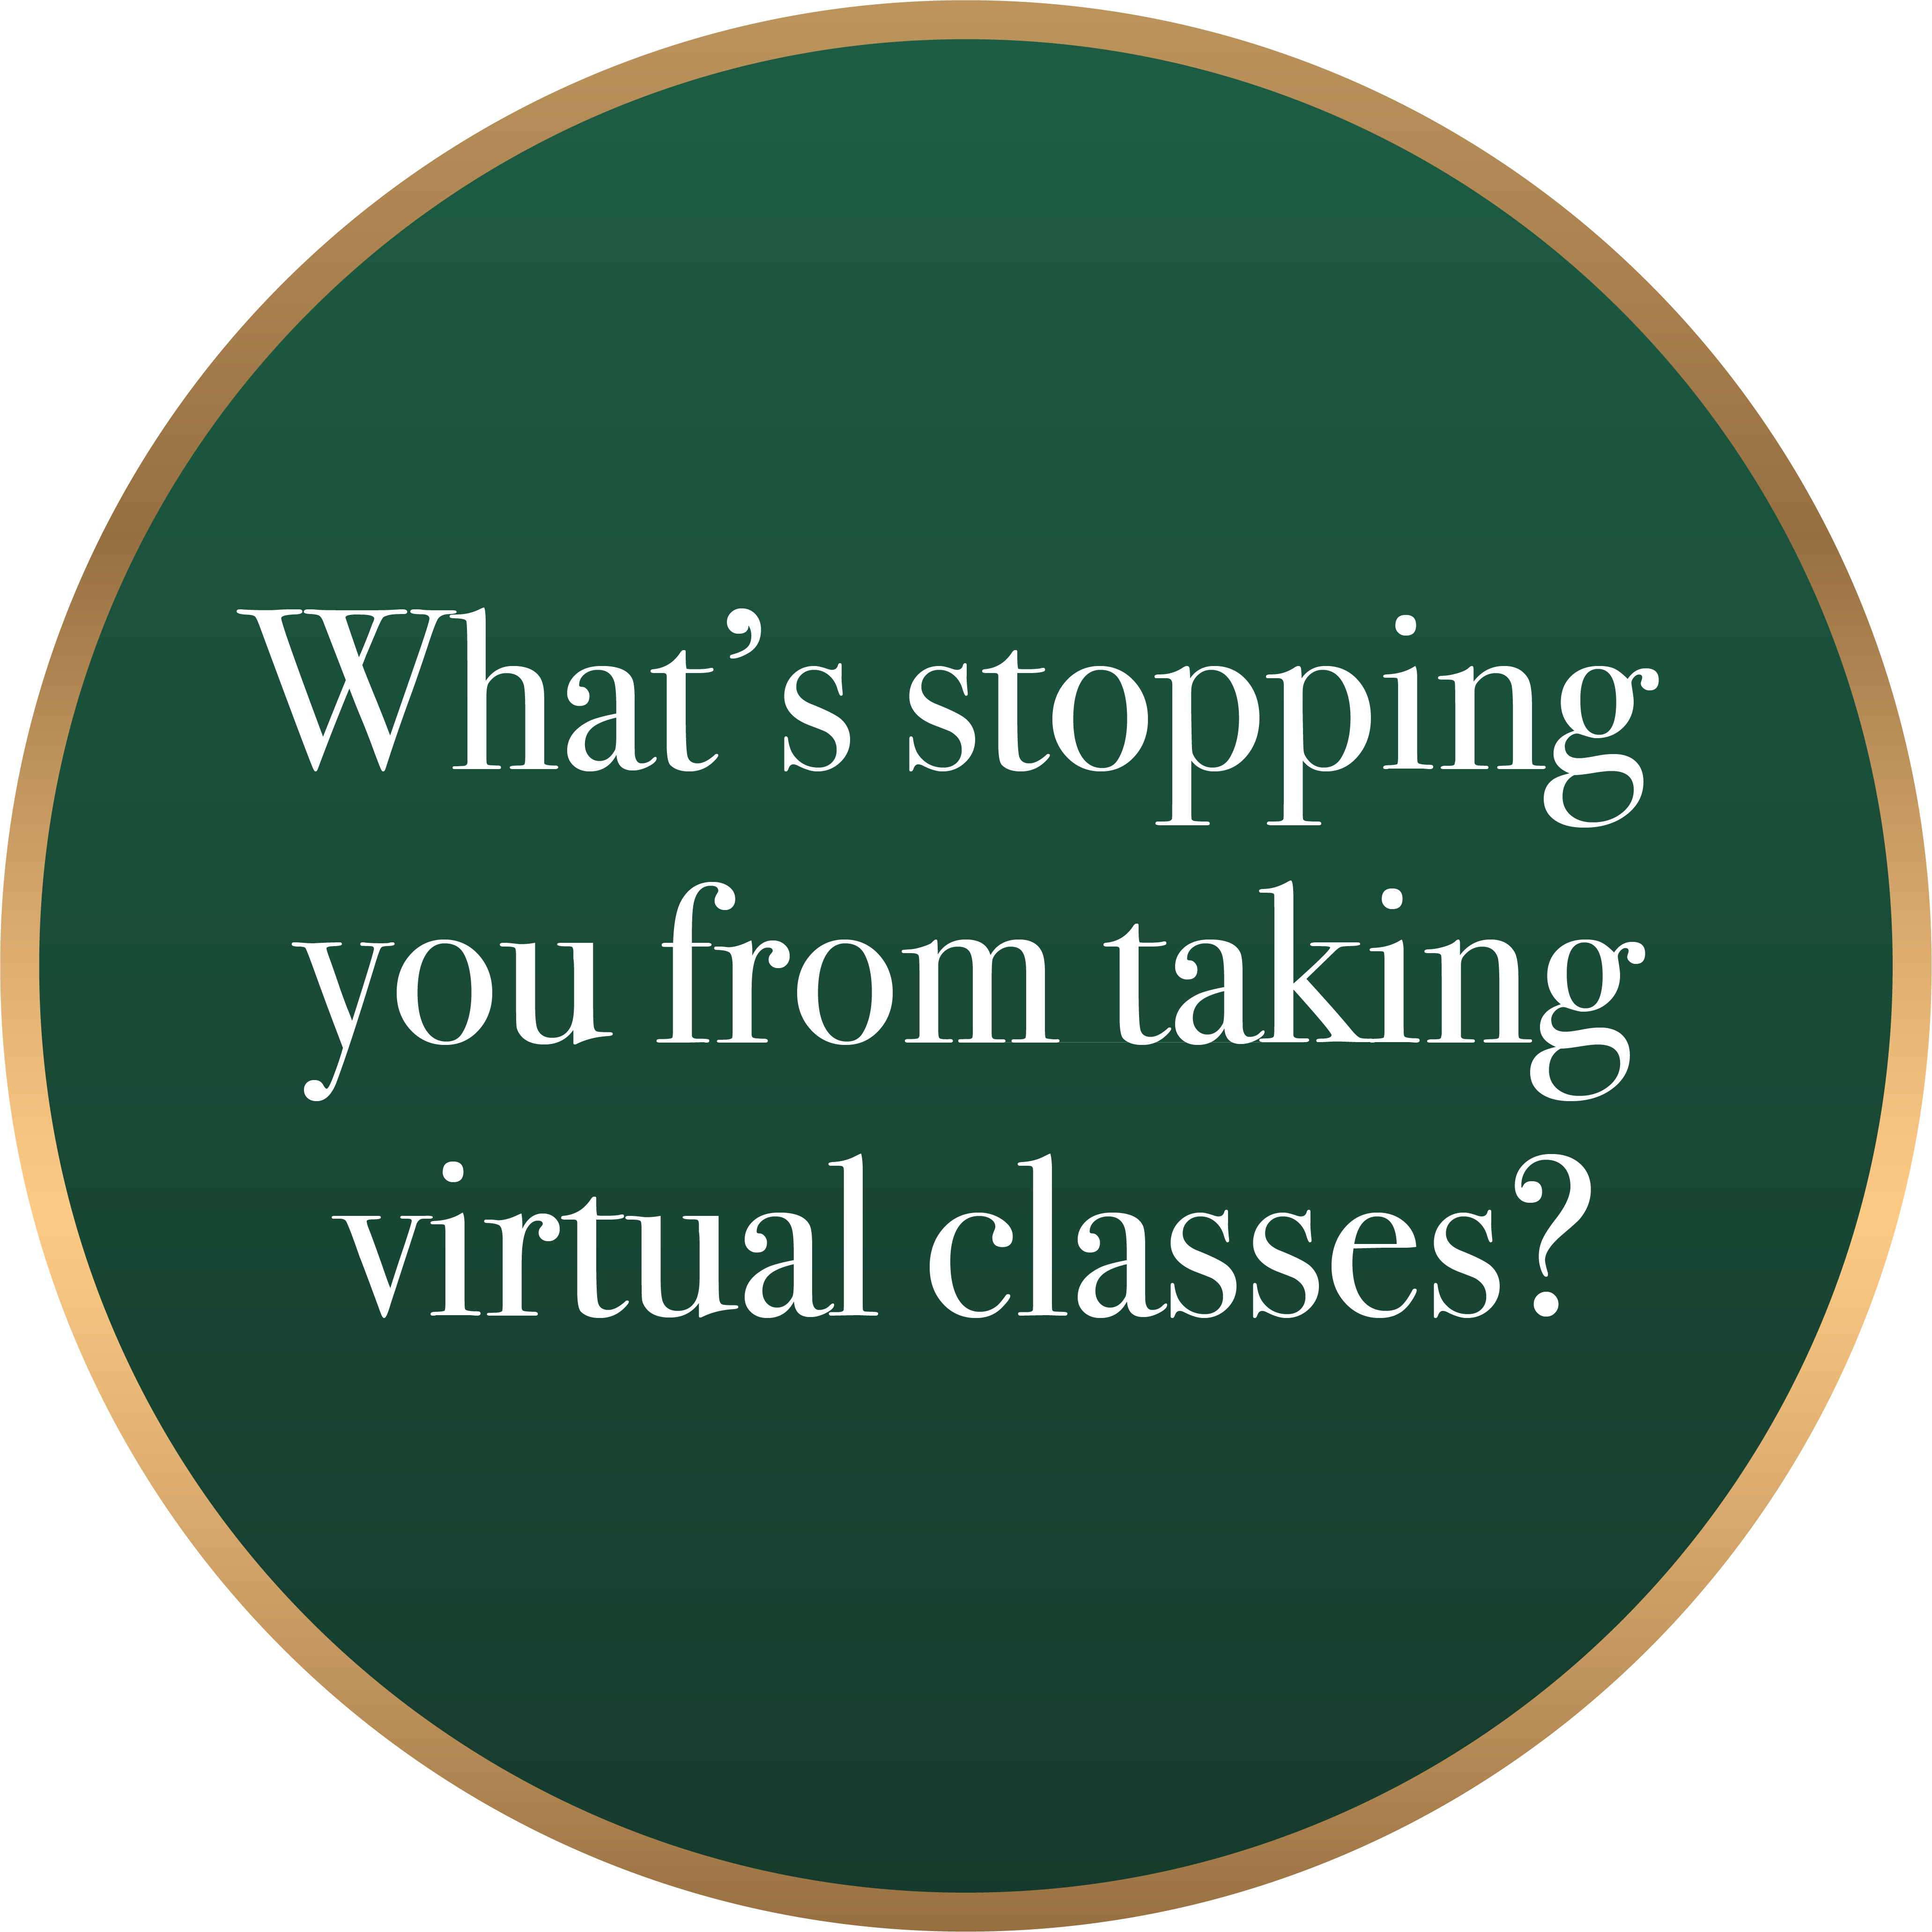 What's stopping you from taking virtual classes?